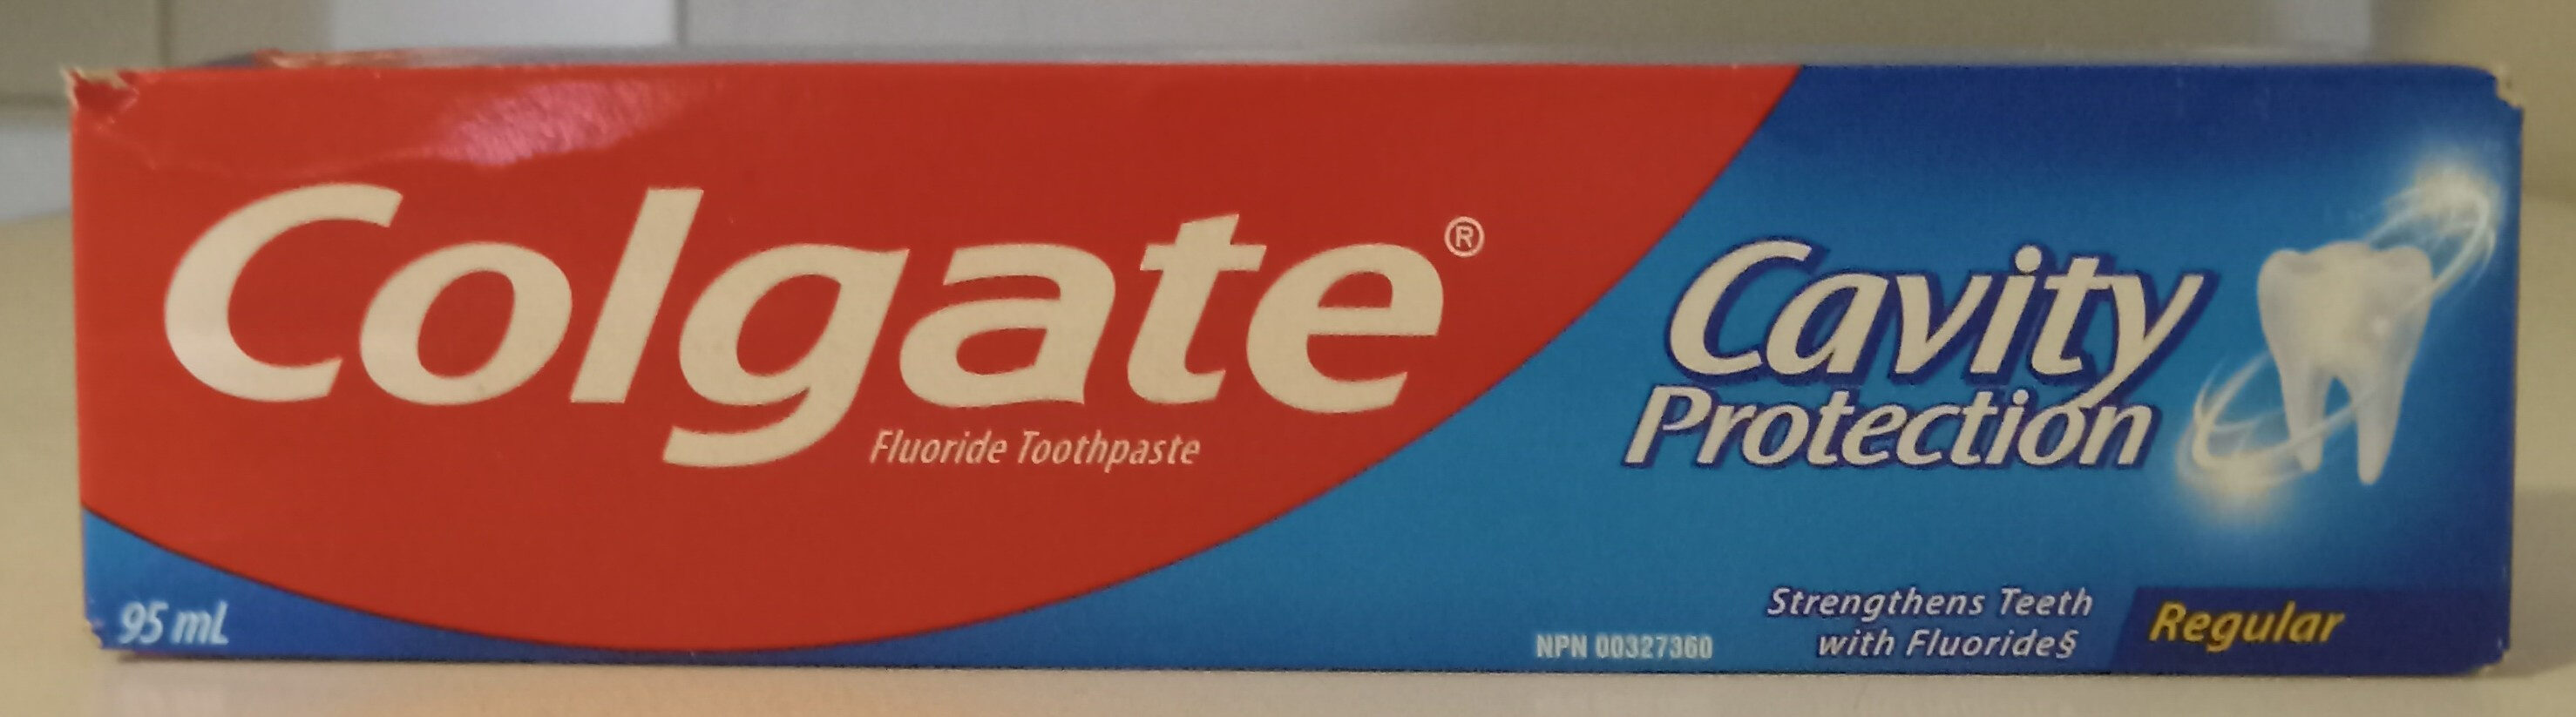 Regular Cavity Protection Flouride Toothpaste - Product - en